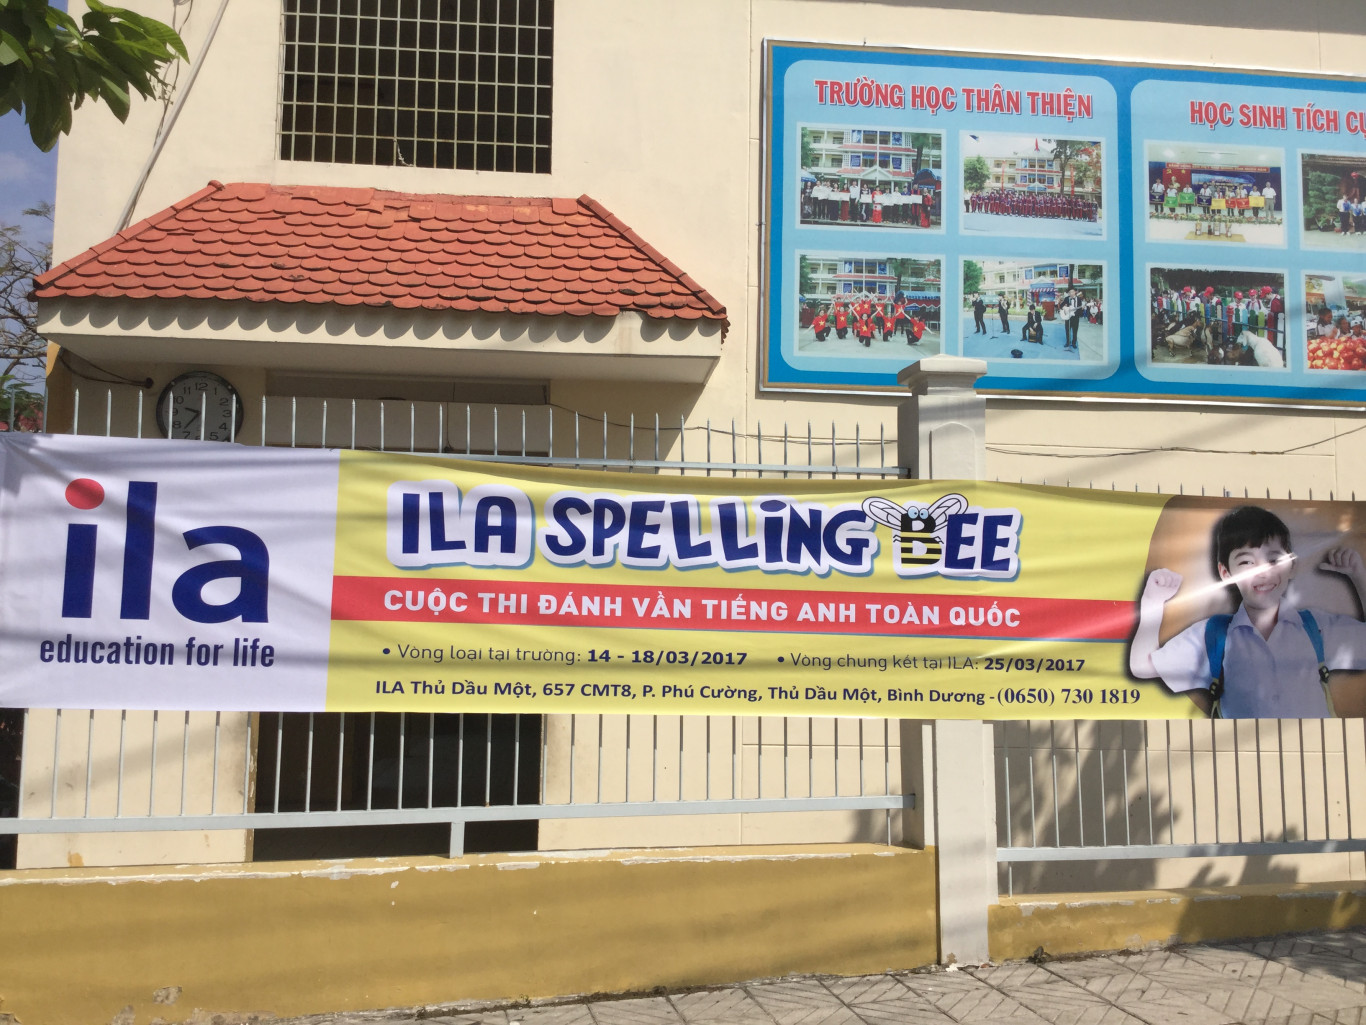 Tổ chức thi "SPELLING BEE"